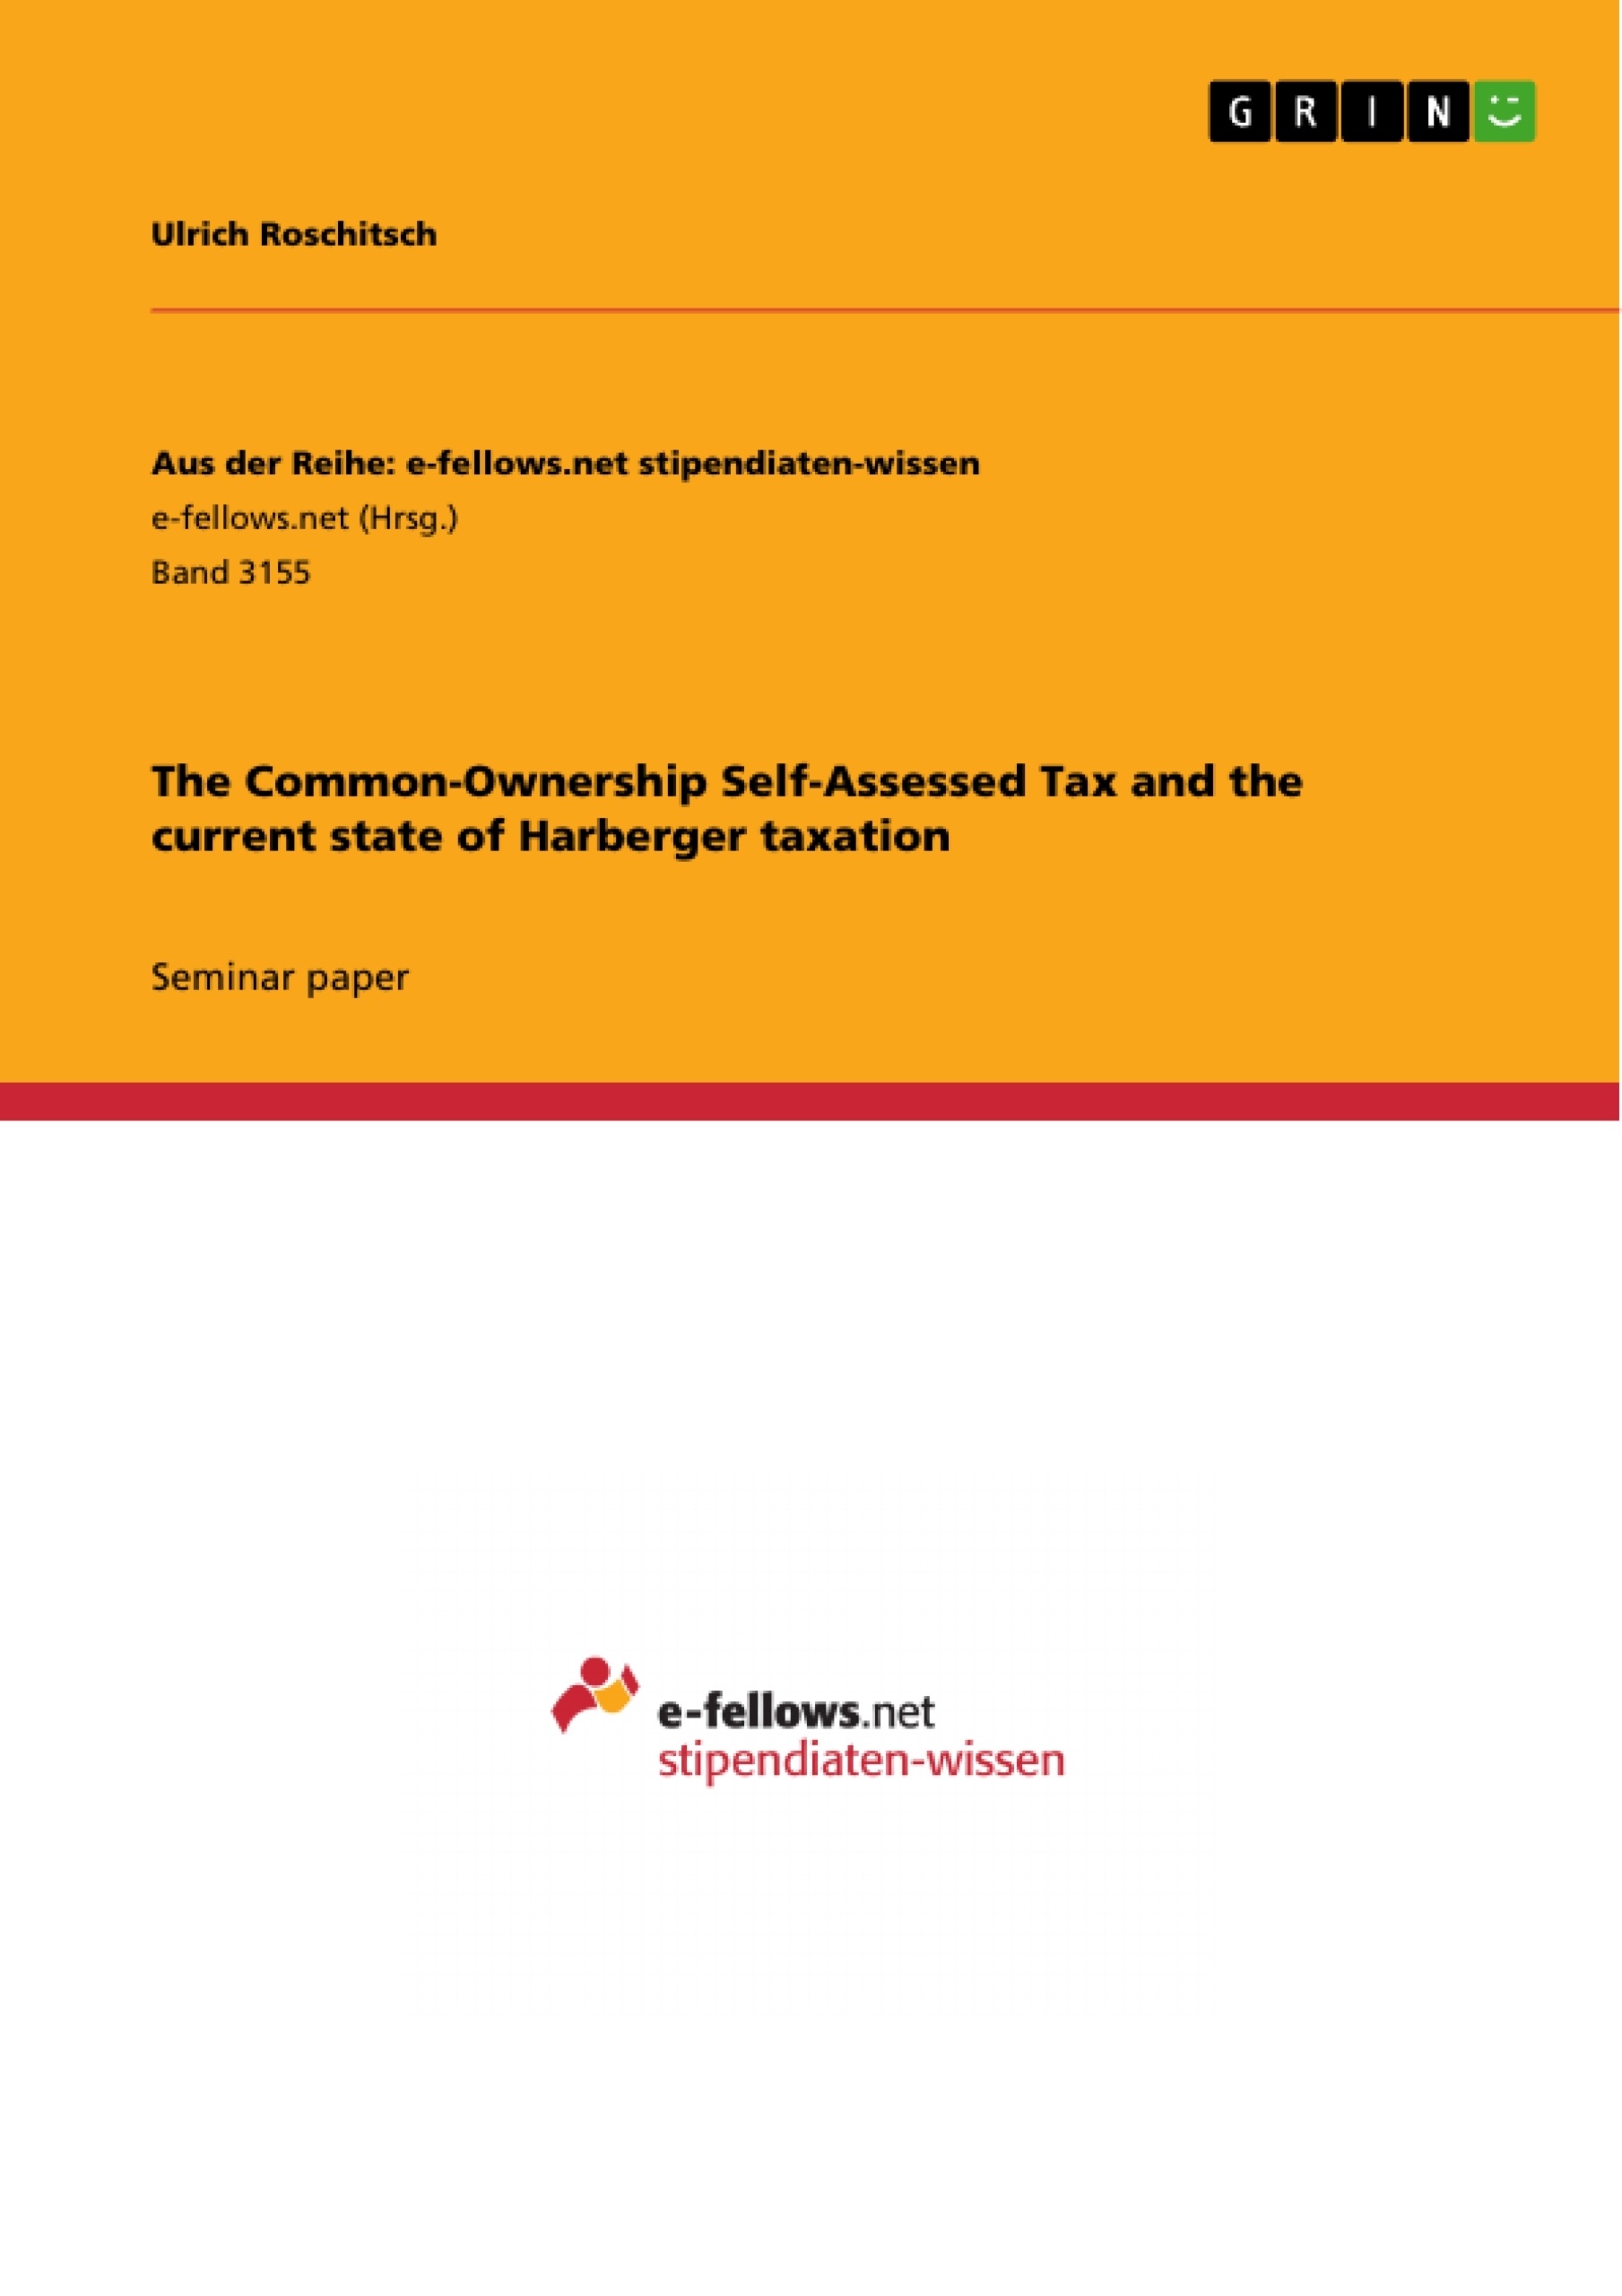 Title: The Common-Ownership Self-Assessed Tax and the current state of Harberger taxation